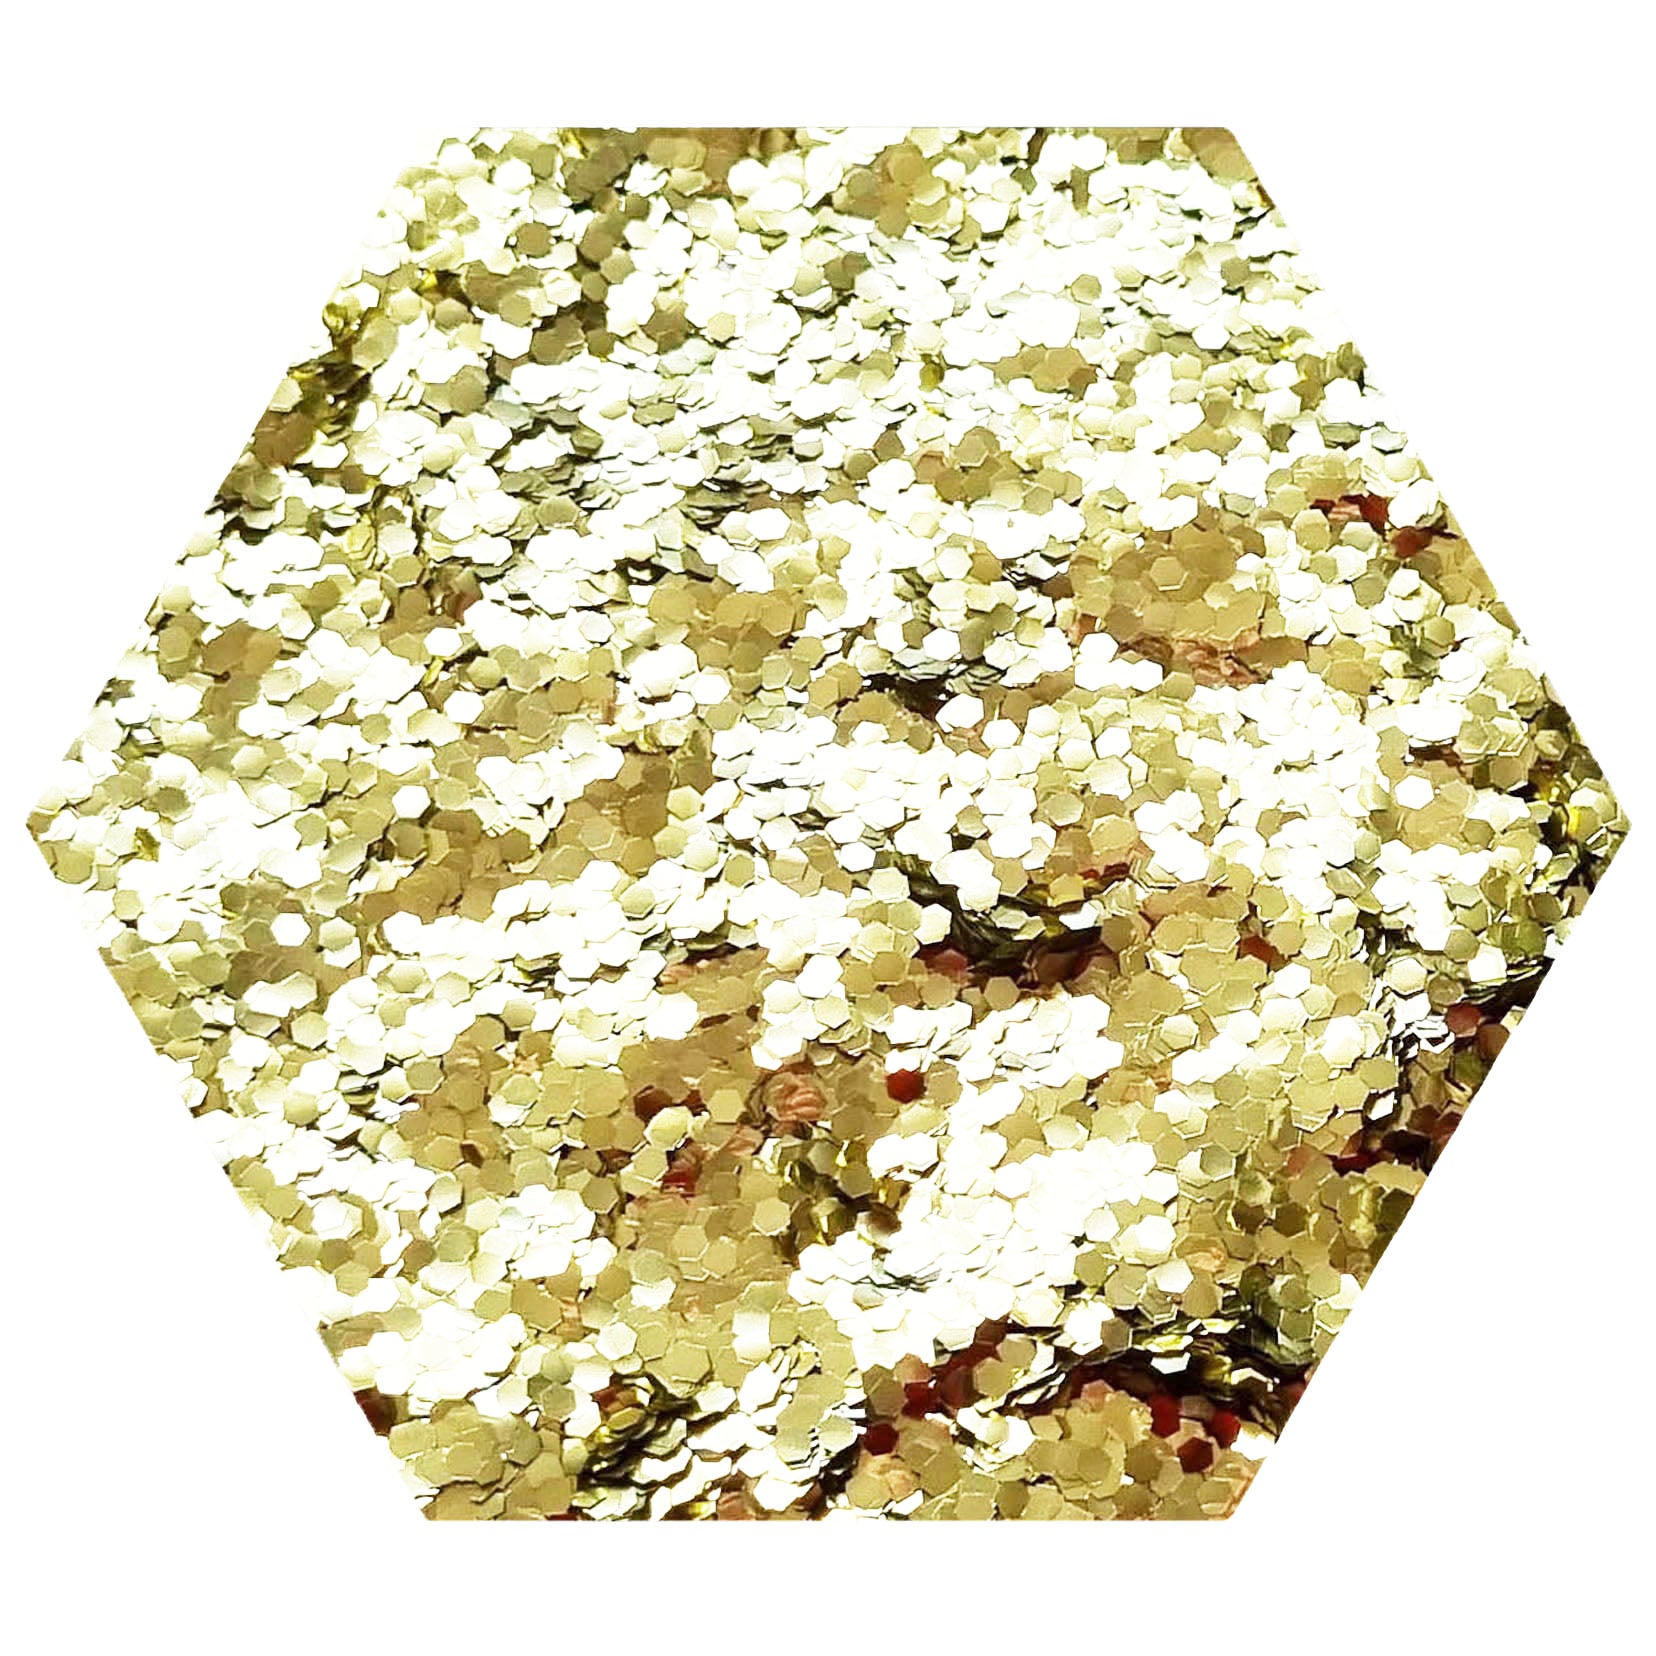 Gold Biodegradable Cosmetic Glitter | Chunky | Truly Personal | Wax Melt Bath Bombs Soap